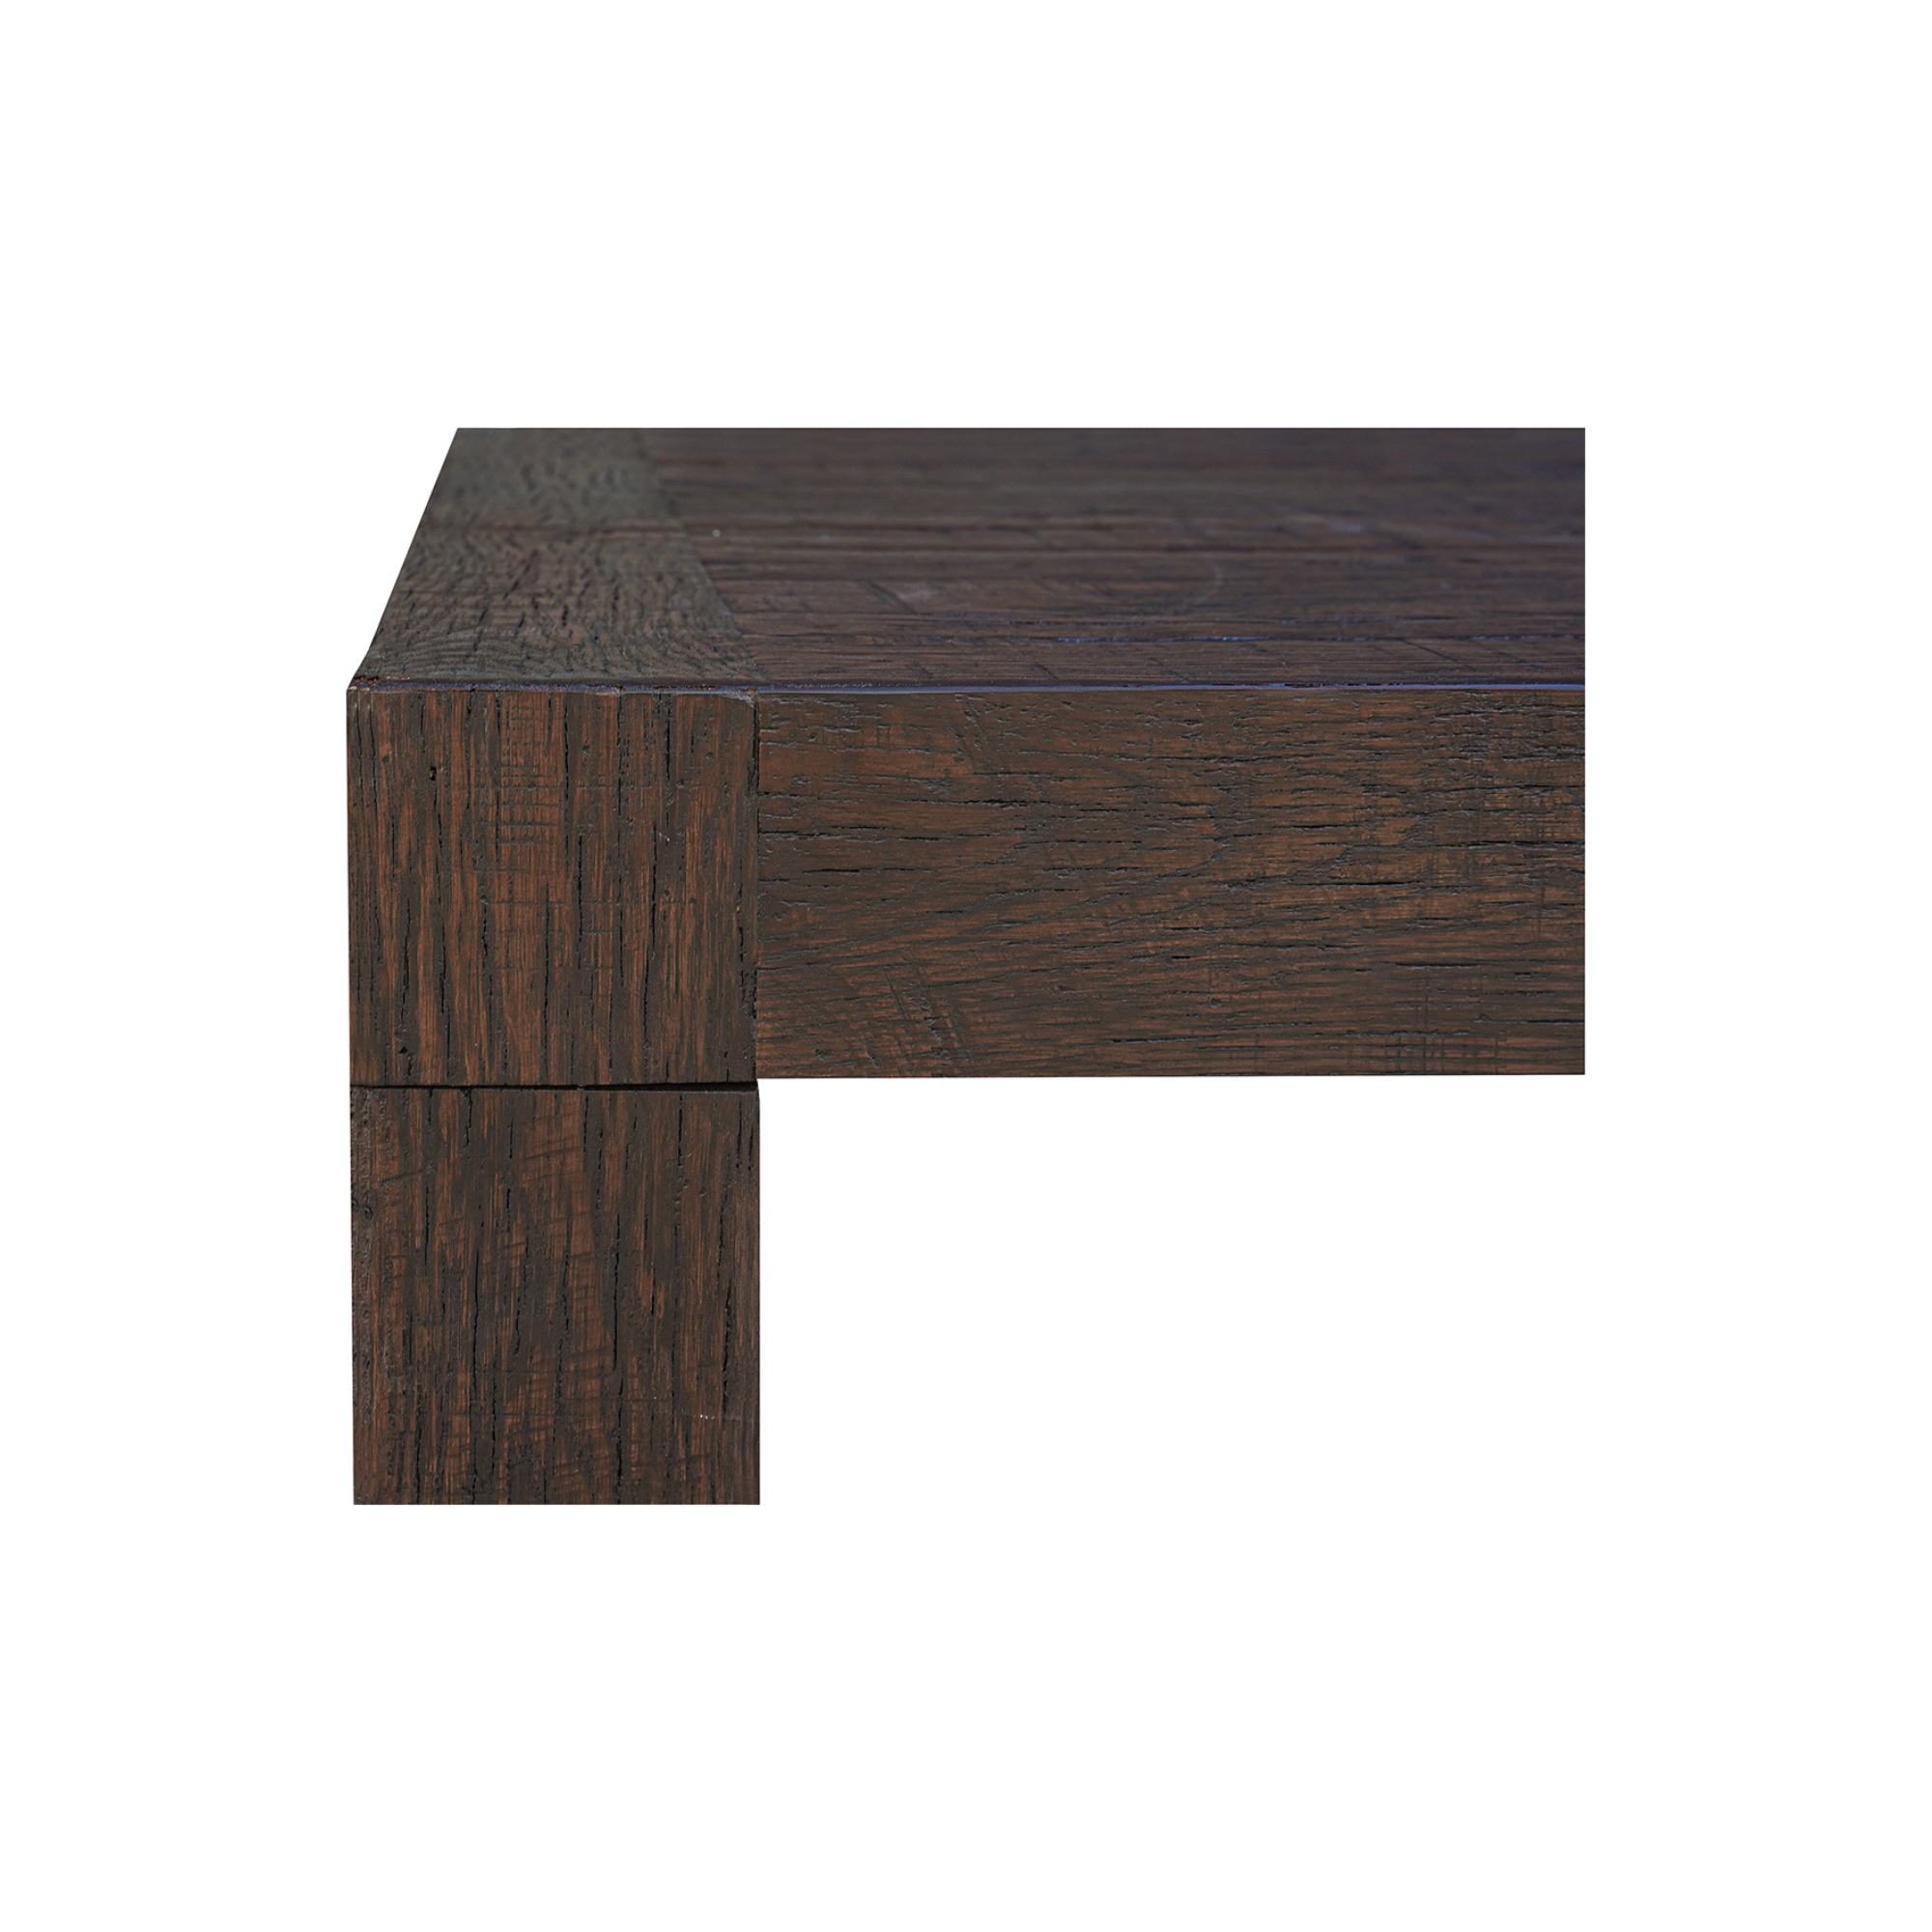 Indira Dining Table